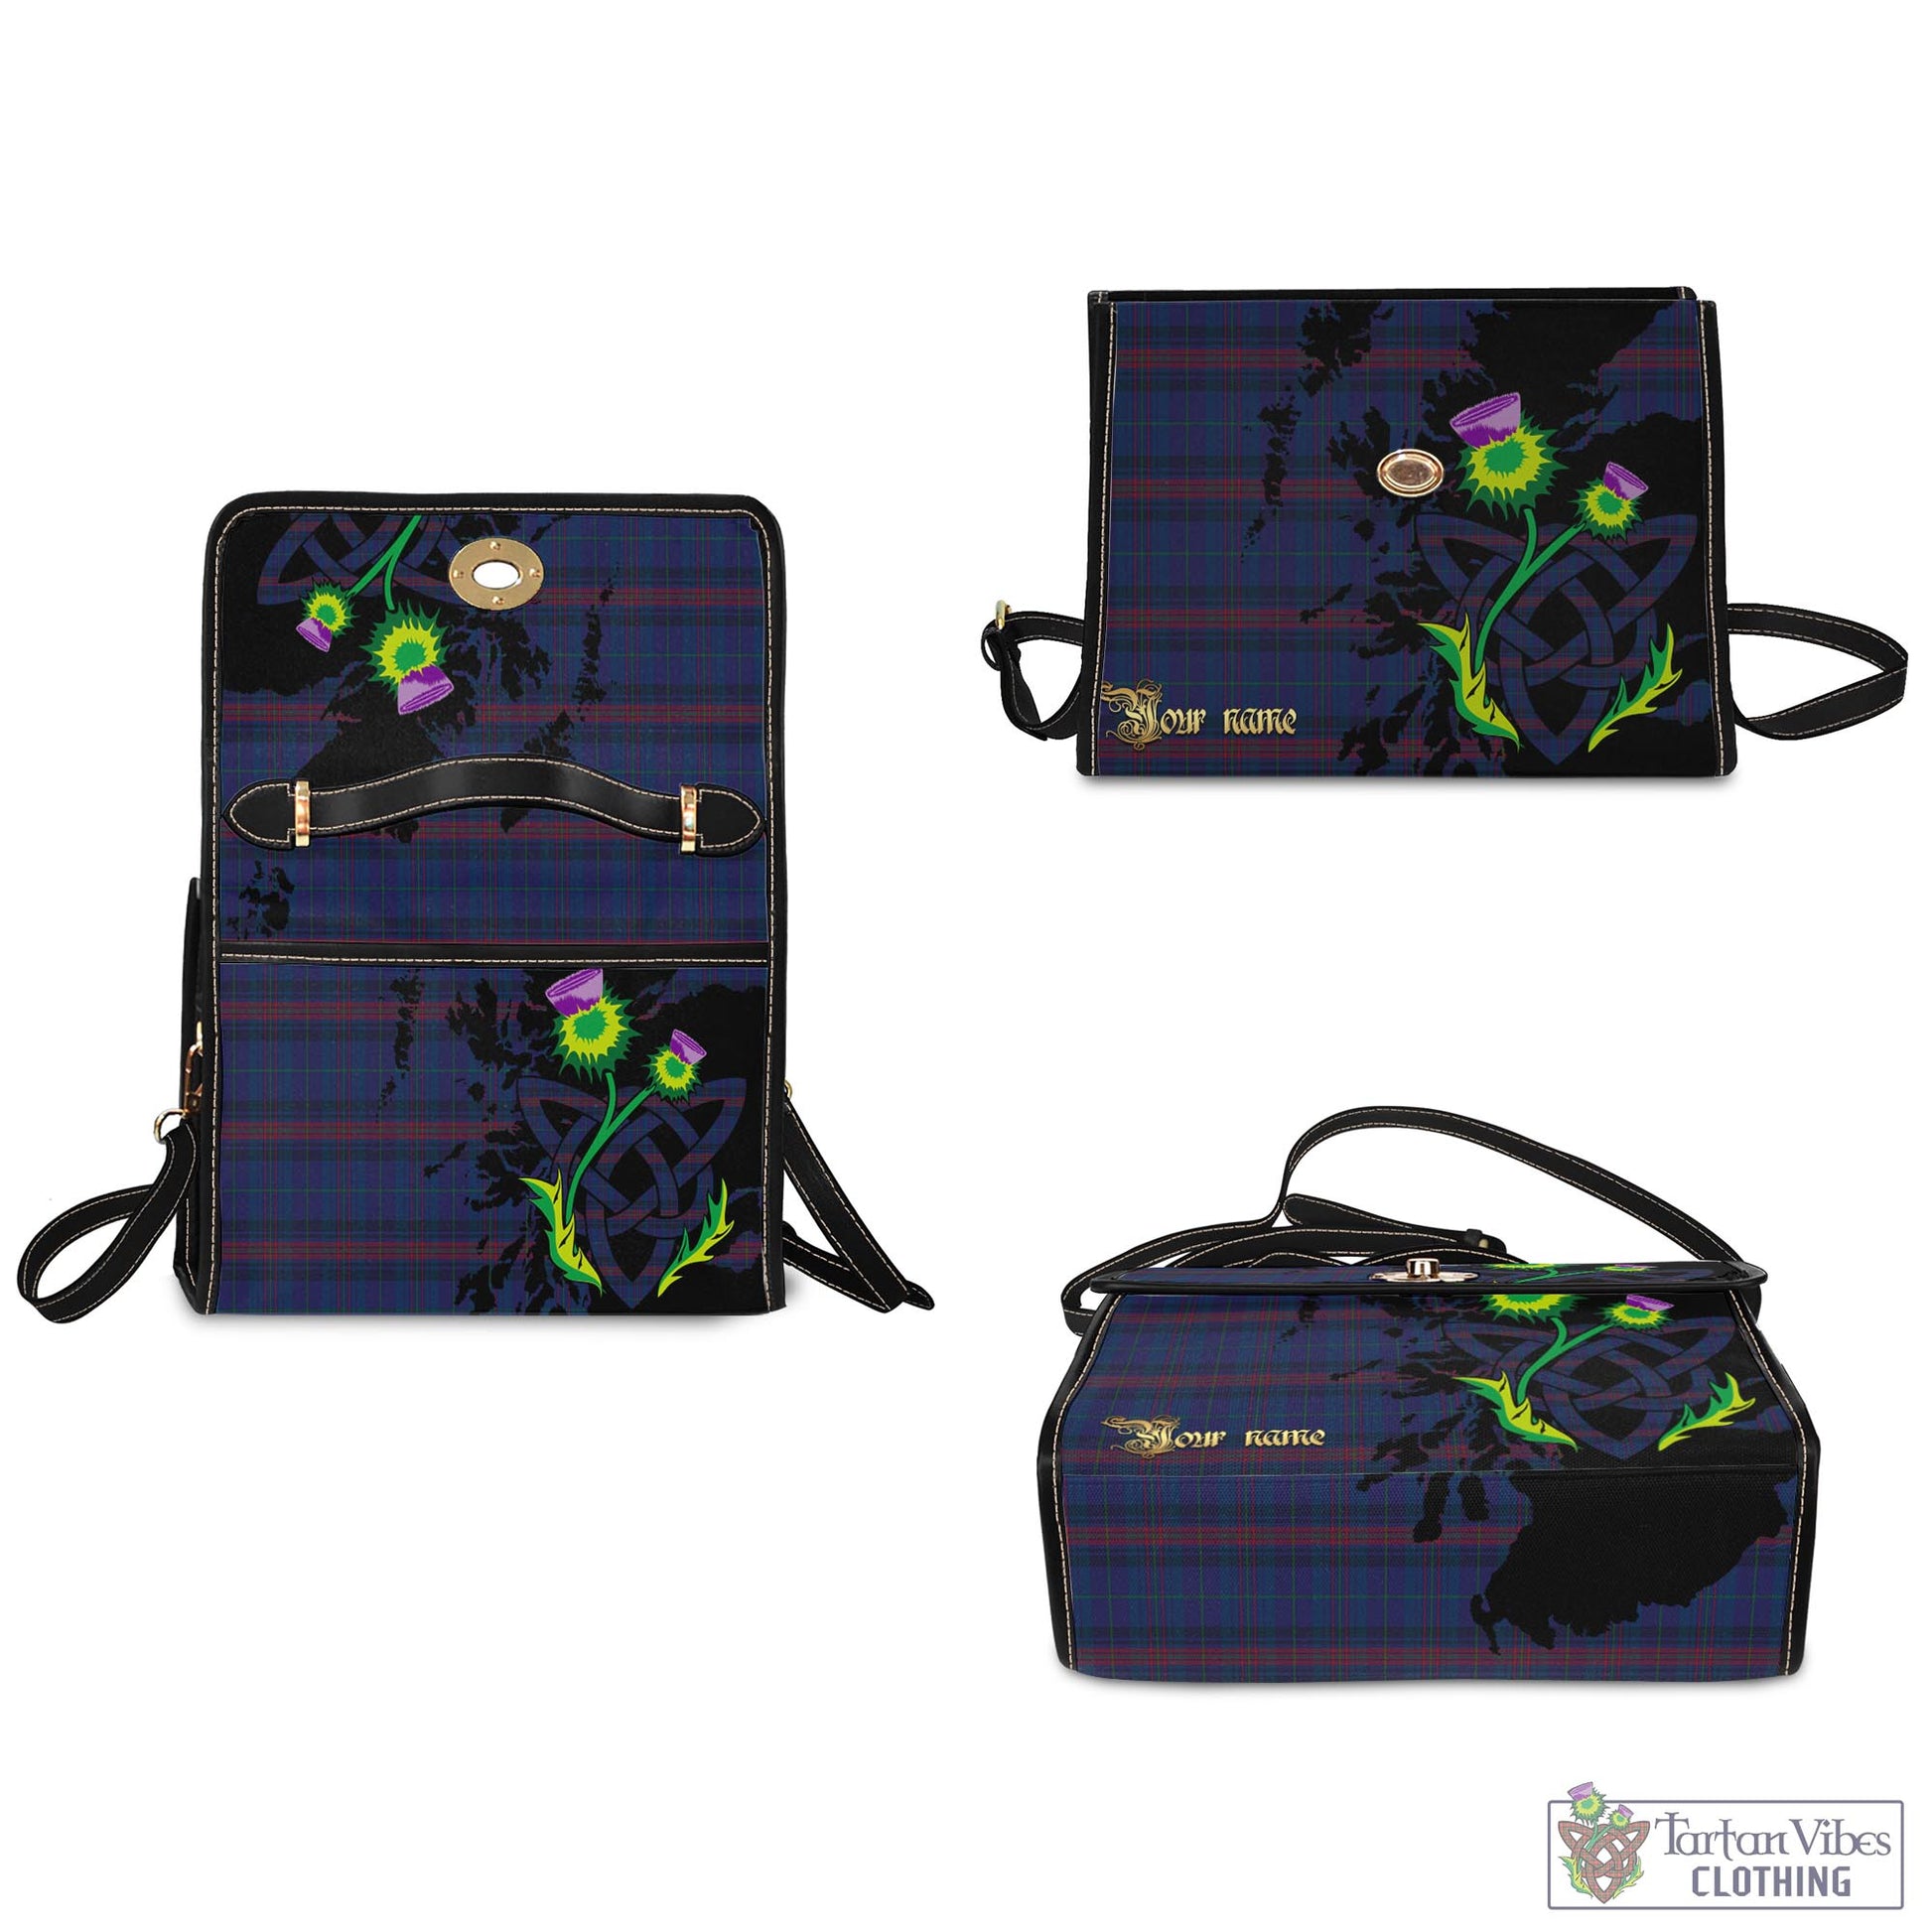 Tartan Vibes Clothing Hughes of Wales Tartan Waterproof Canvas Bag with Scotland Map and Thistle Celtic Accents